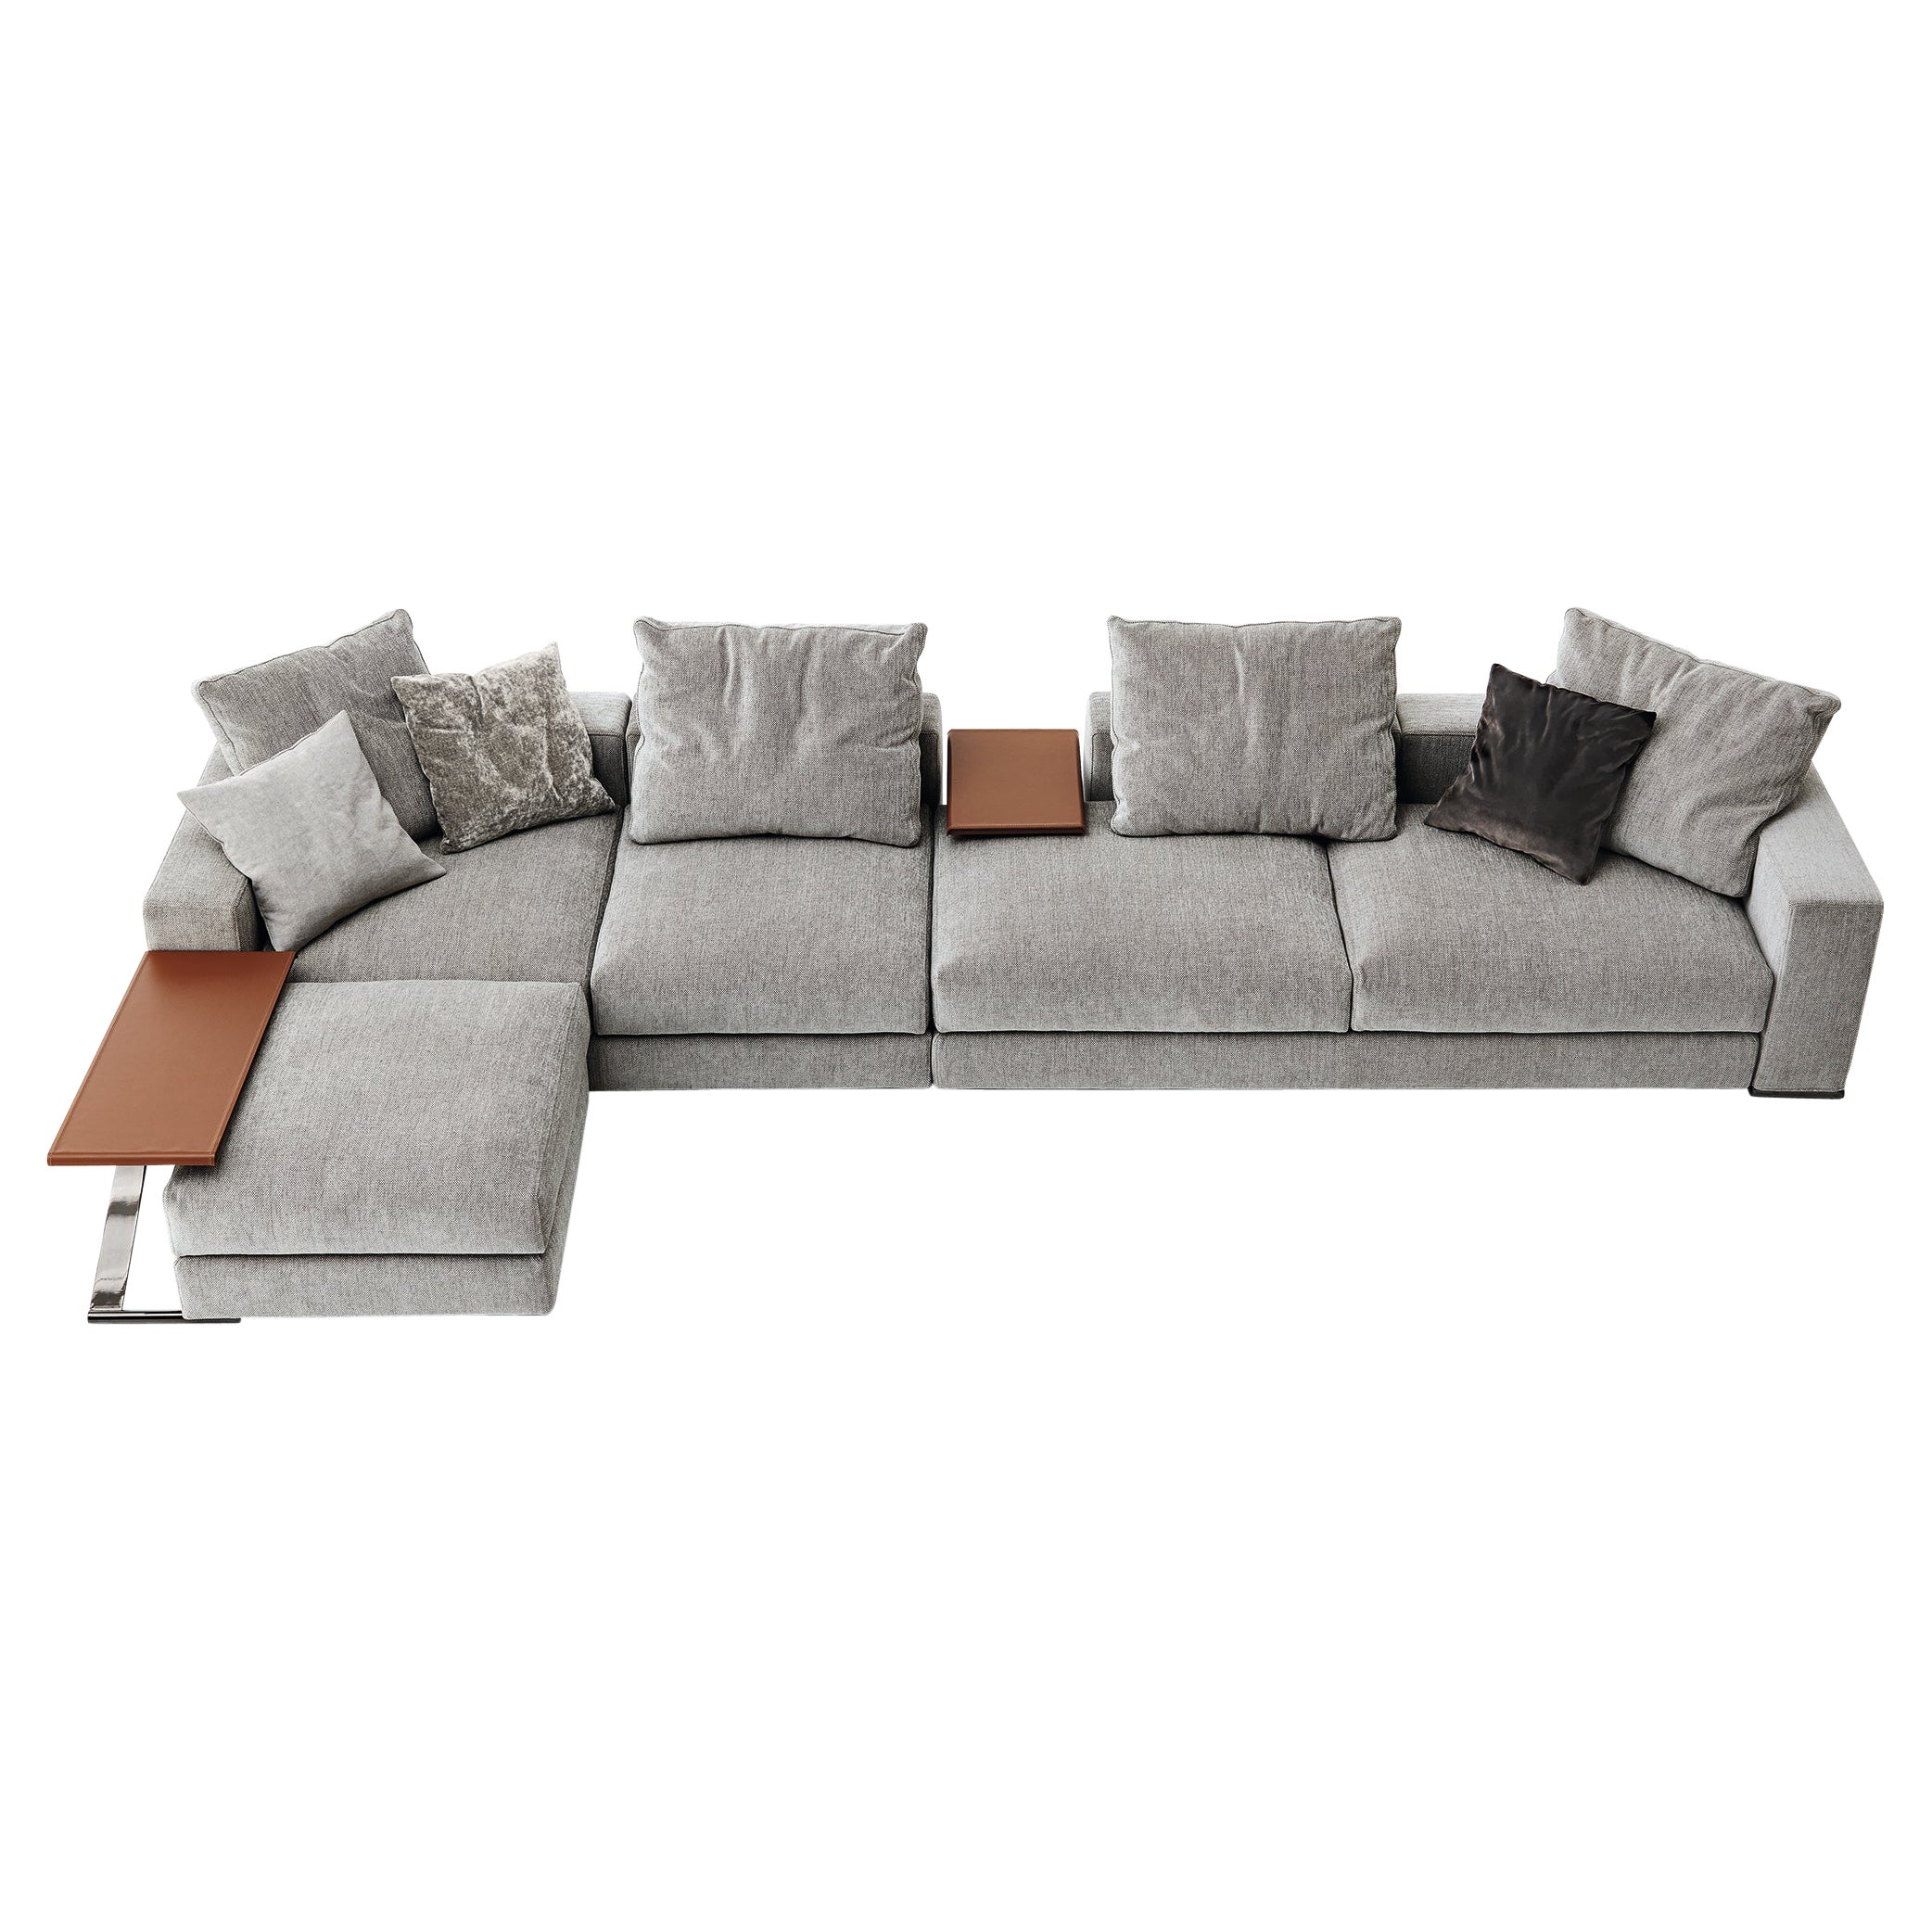 Ananta Class 23 Extra Large Sofa in Lusso Upholstery and Corten by Sergio Bicego For Sale